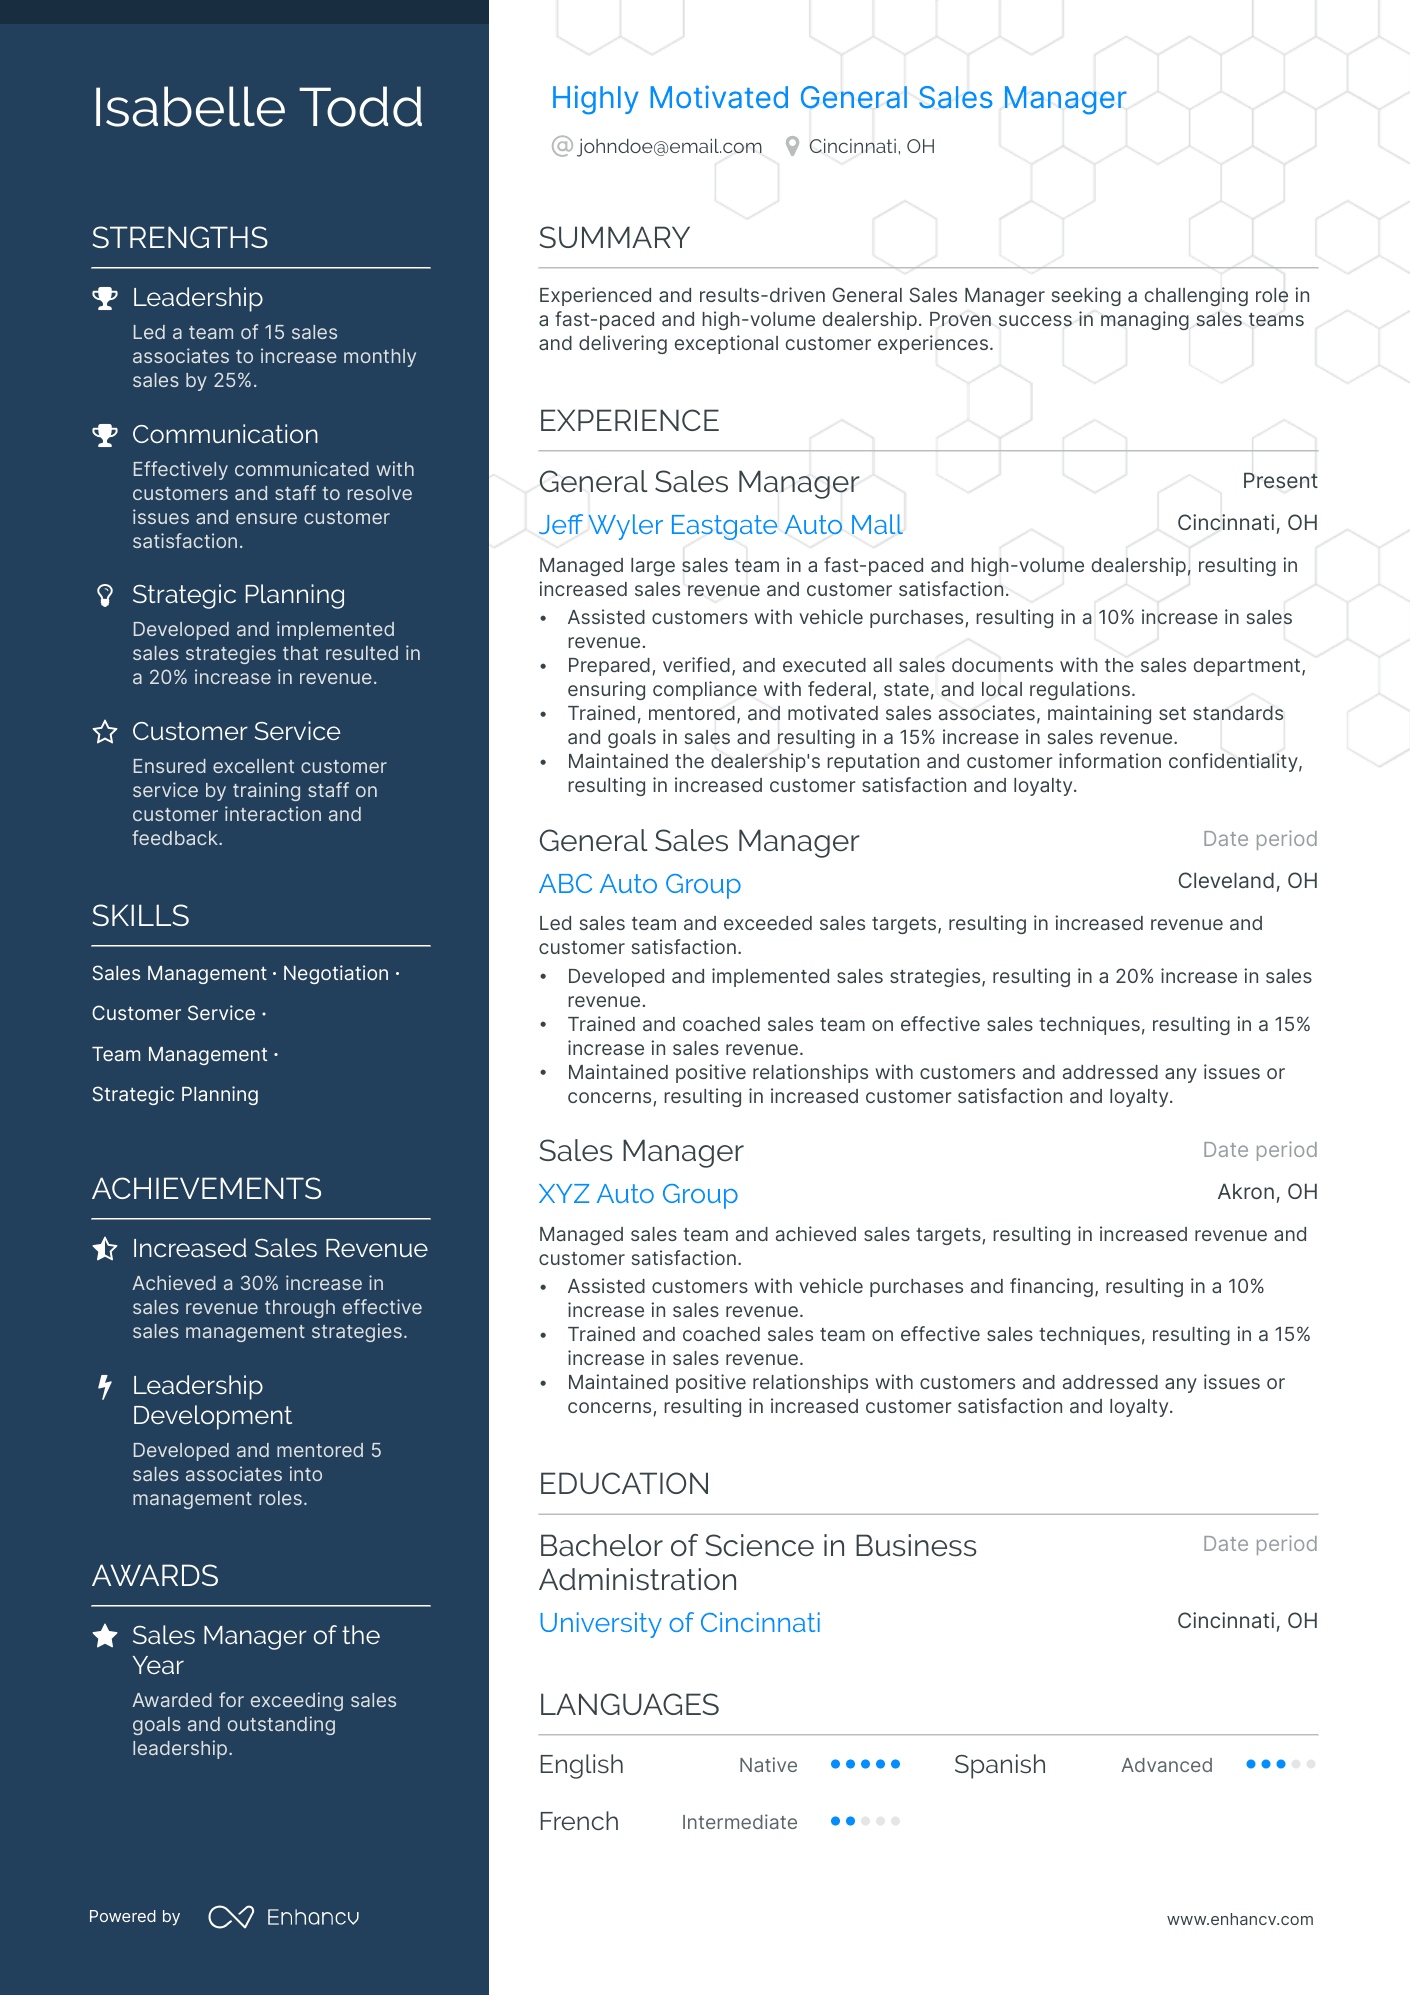 General Sales Manager resume example